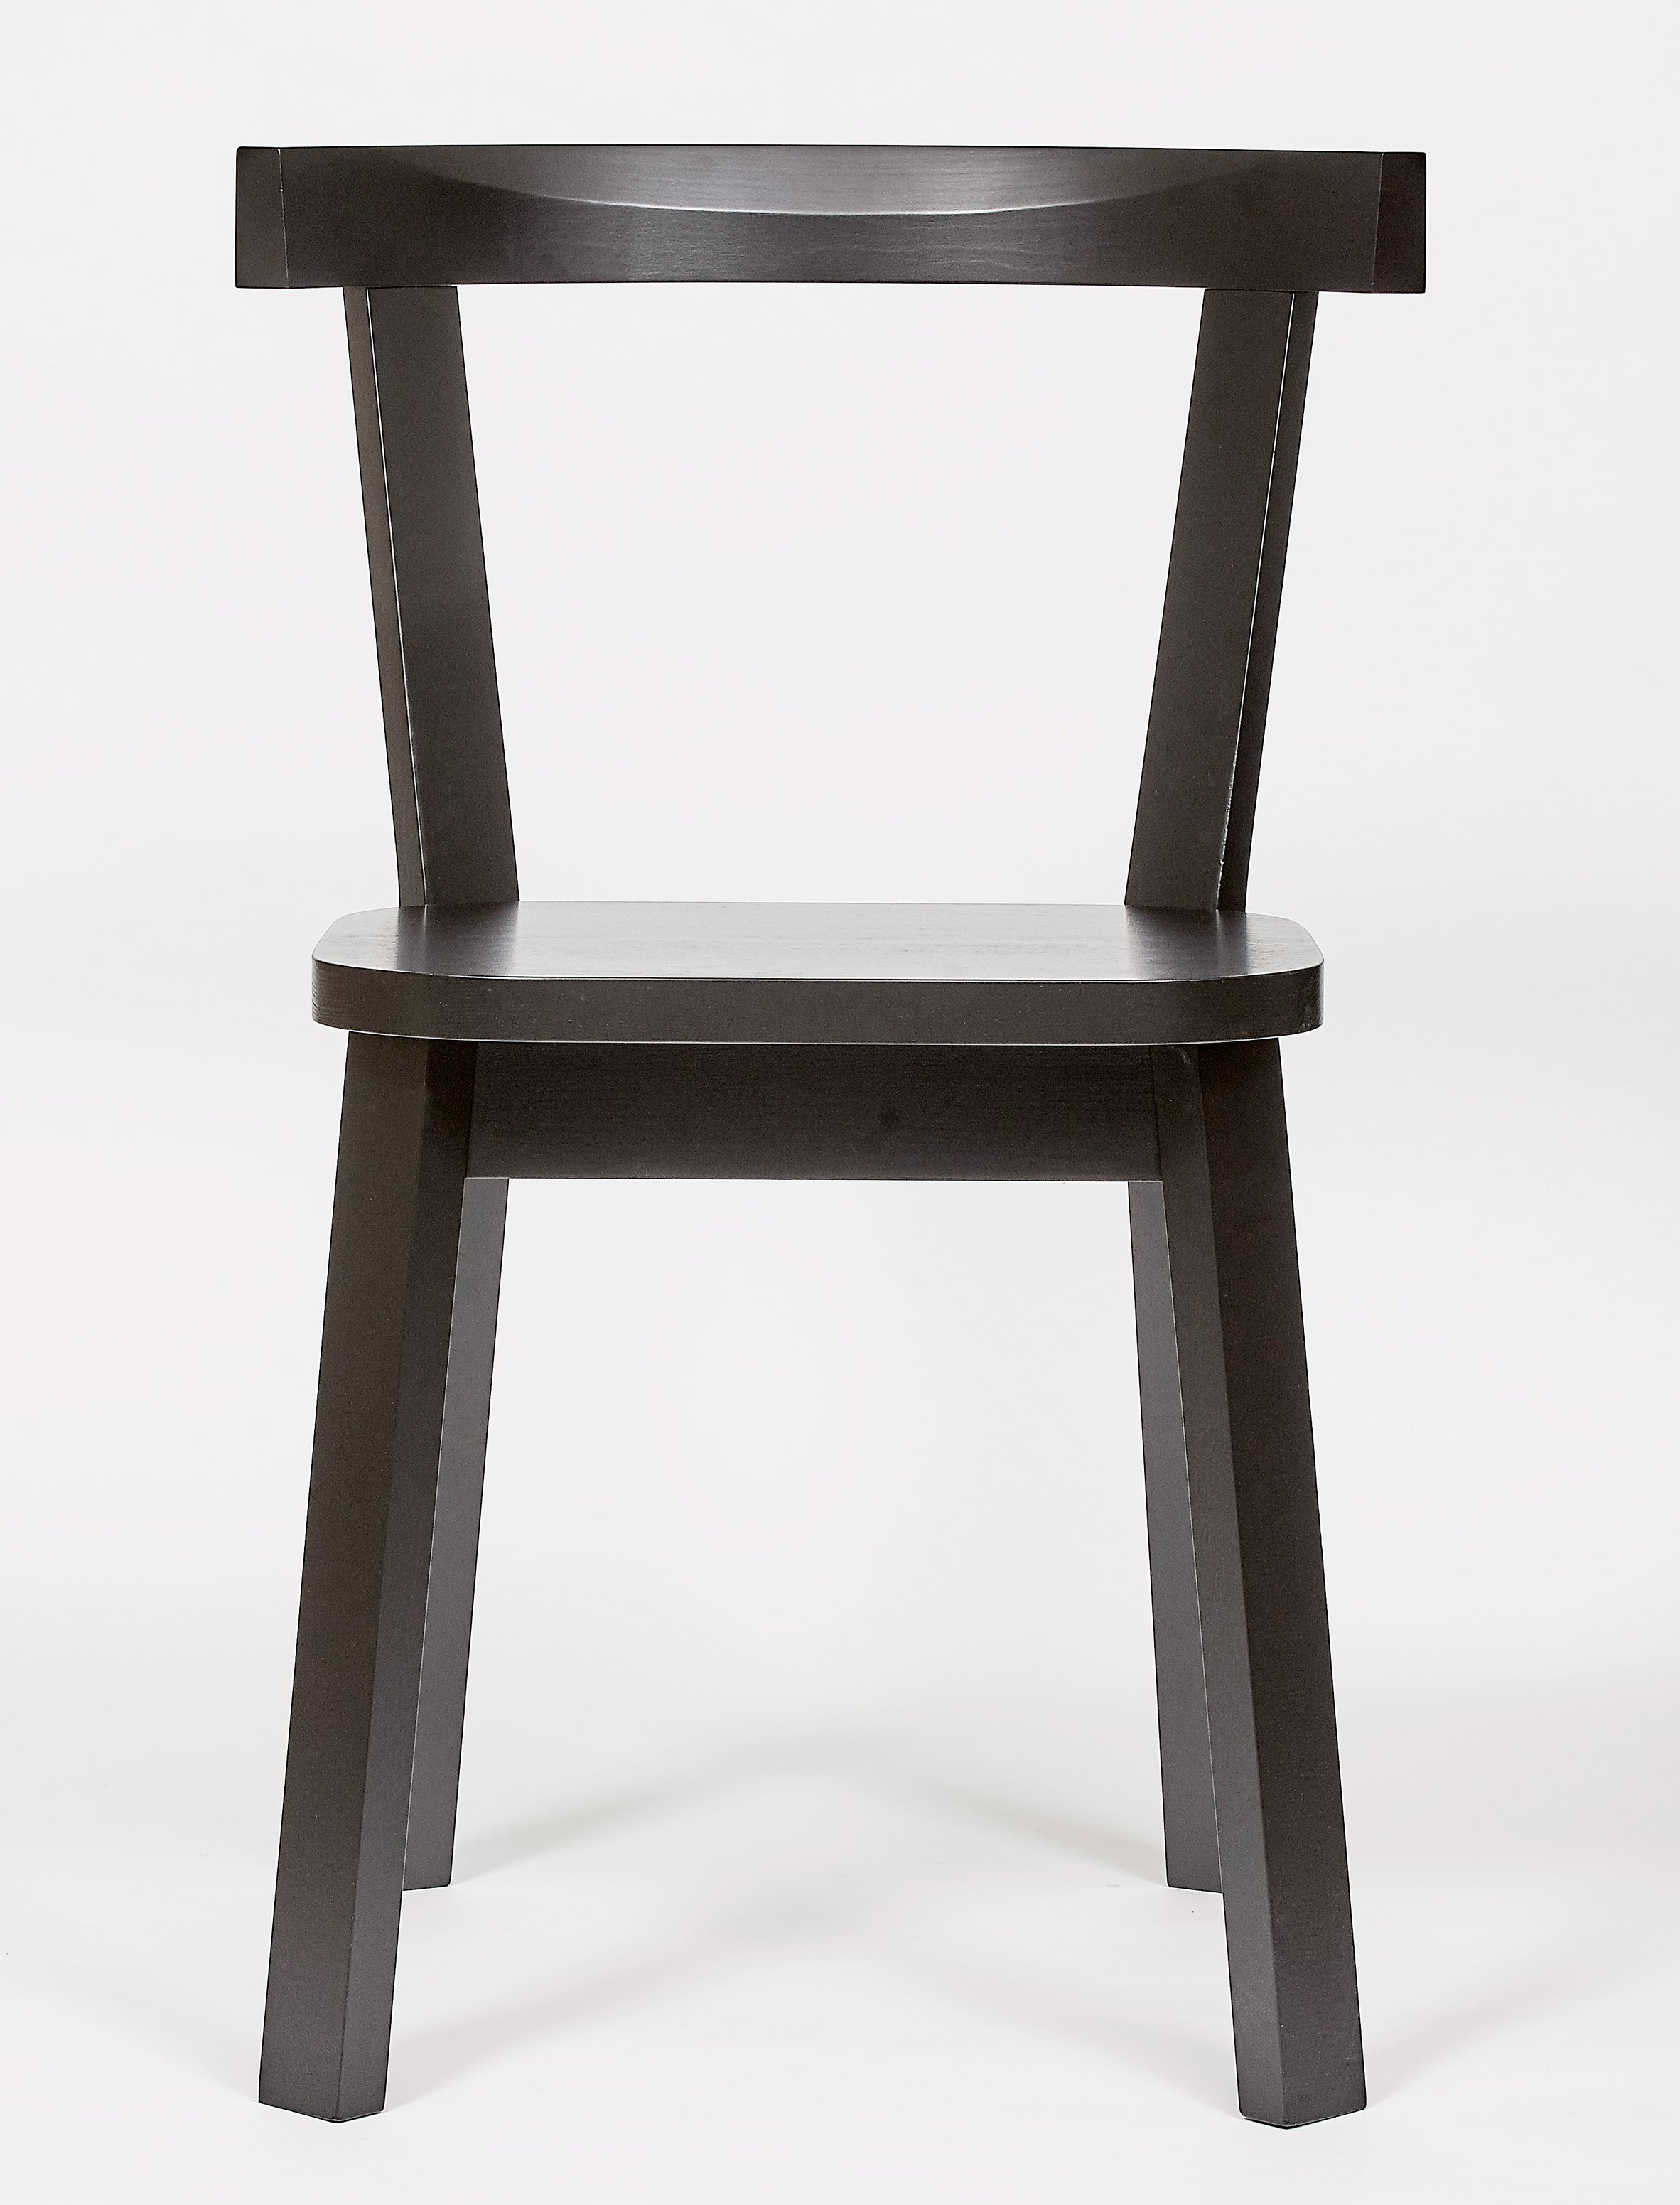 work-series-another-country-design-furniture-cropped_dezeen_2364_col_9.jpg